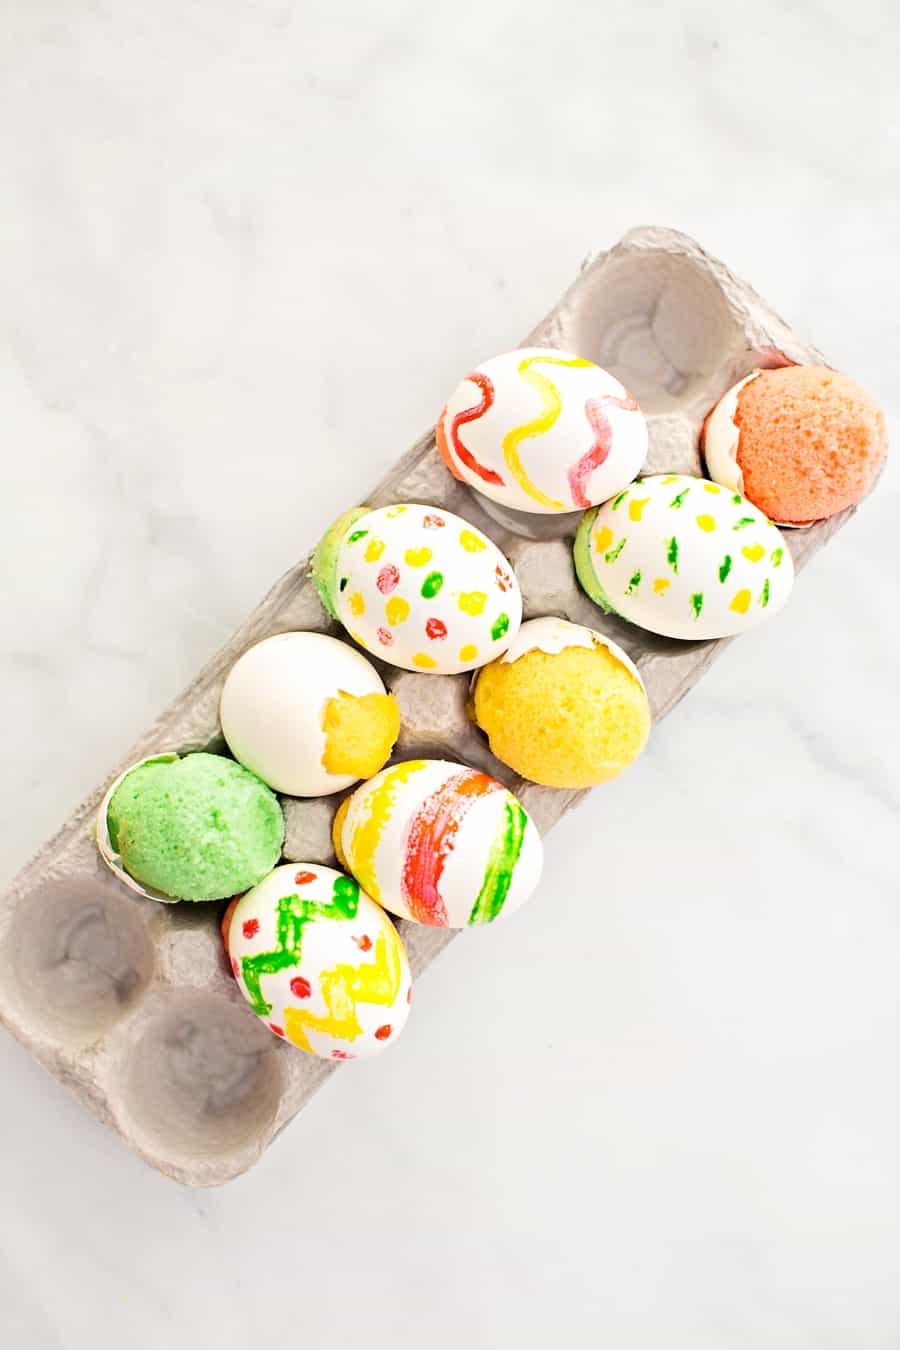 These mini Cake in Eggshells are a fun spring surprise and clever sweet treat of an April Fool's prank! The perfect Easter treat for kids. 